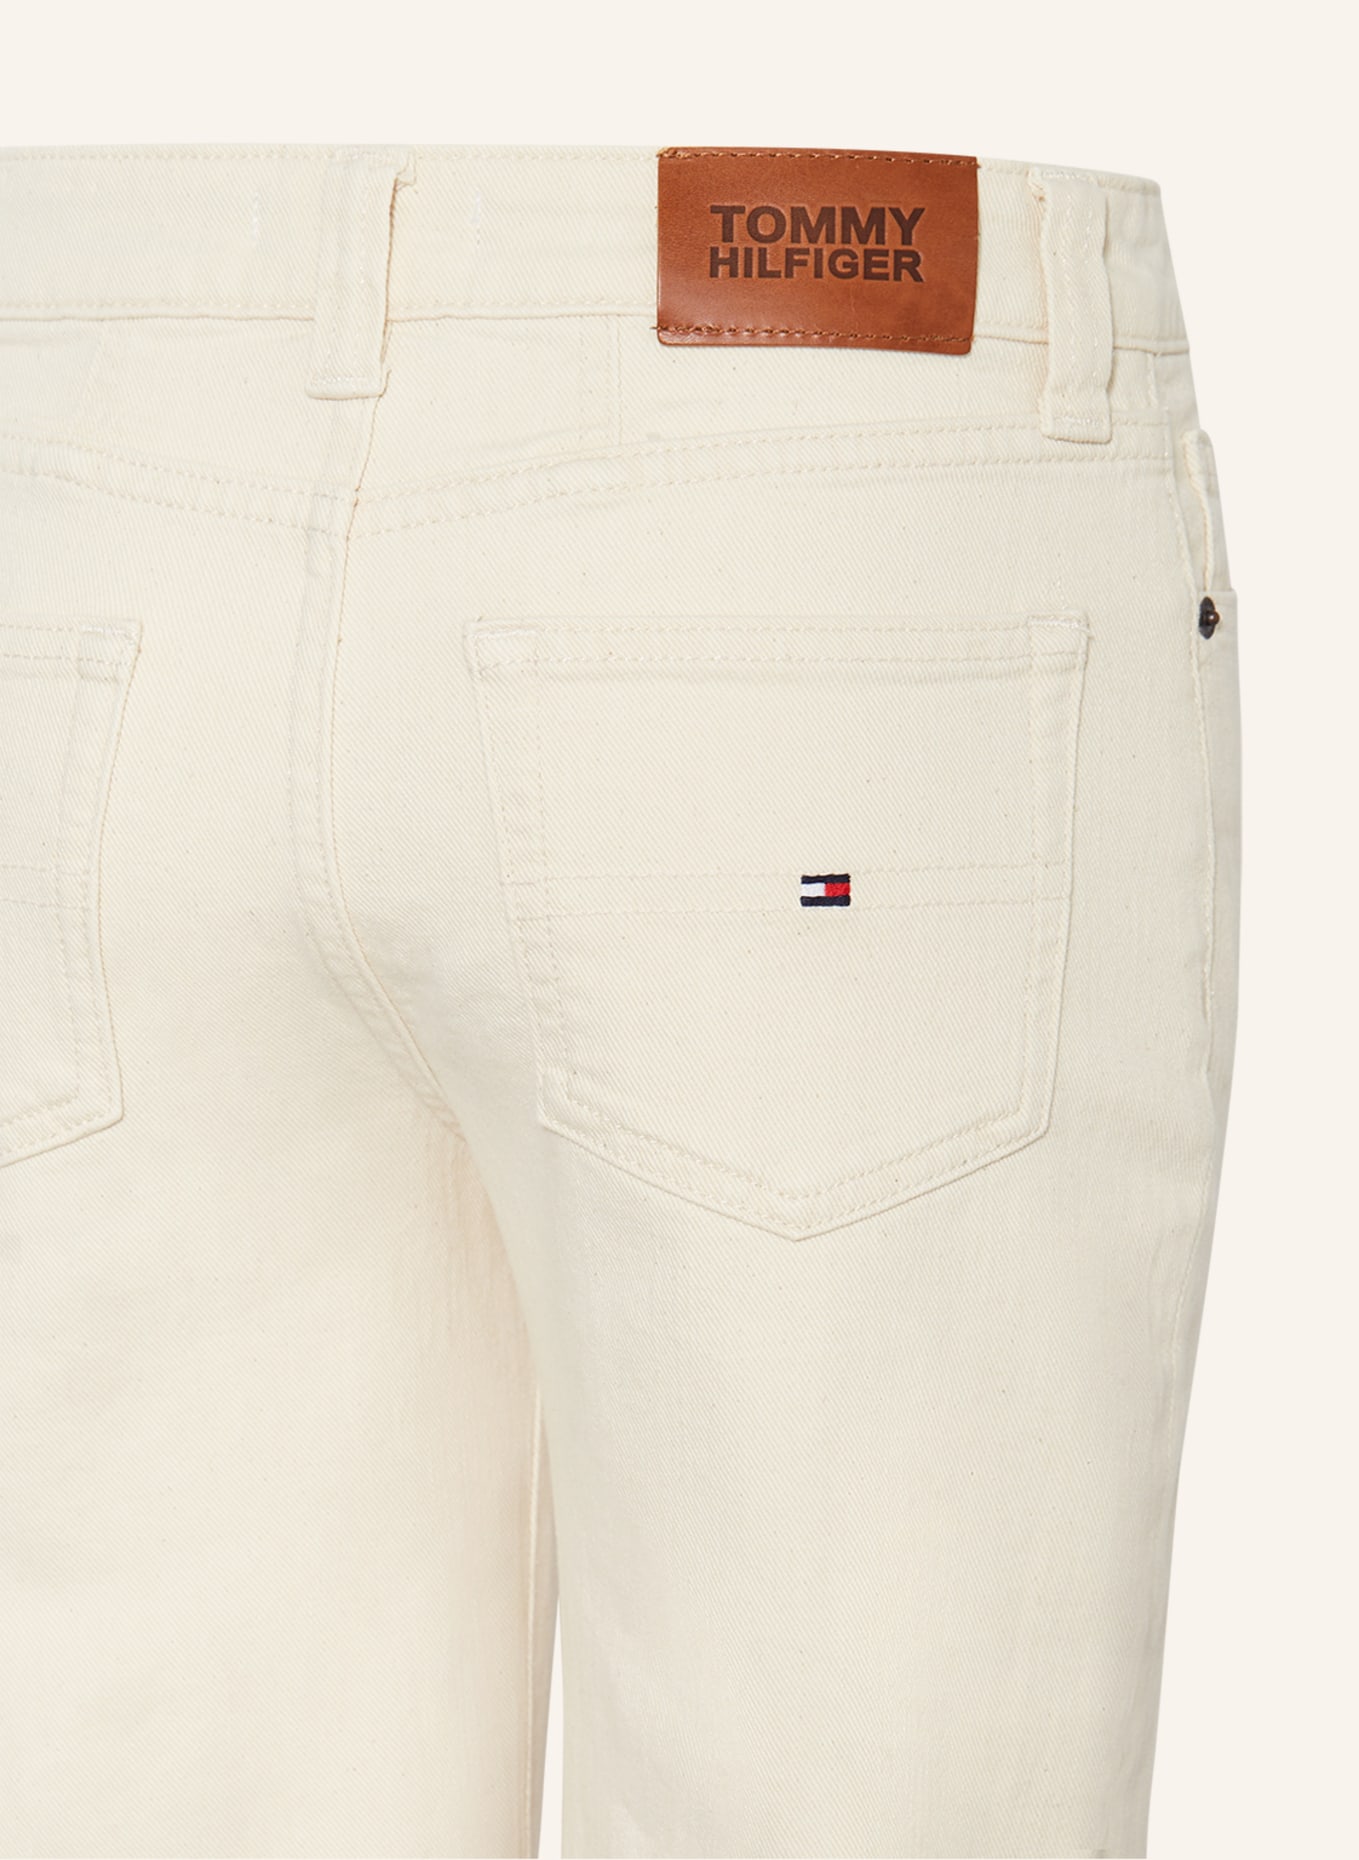 TOMMY HILFIGER Jeans GIRLFRIEND CALICO Straight Fit, Farbe: WEISS (Bild 3)